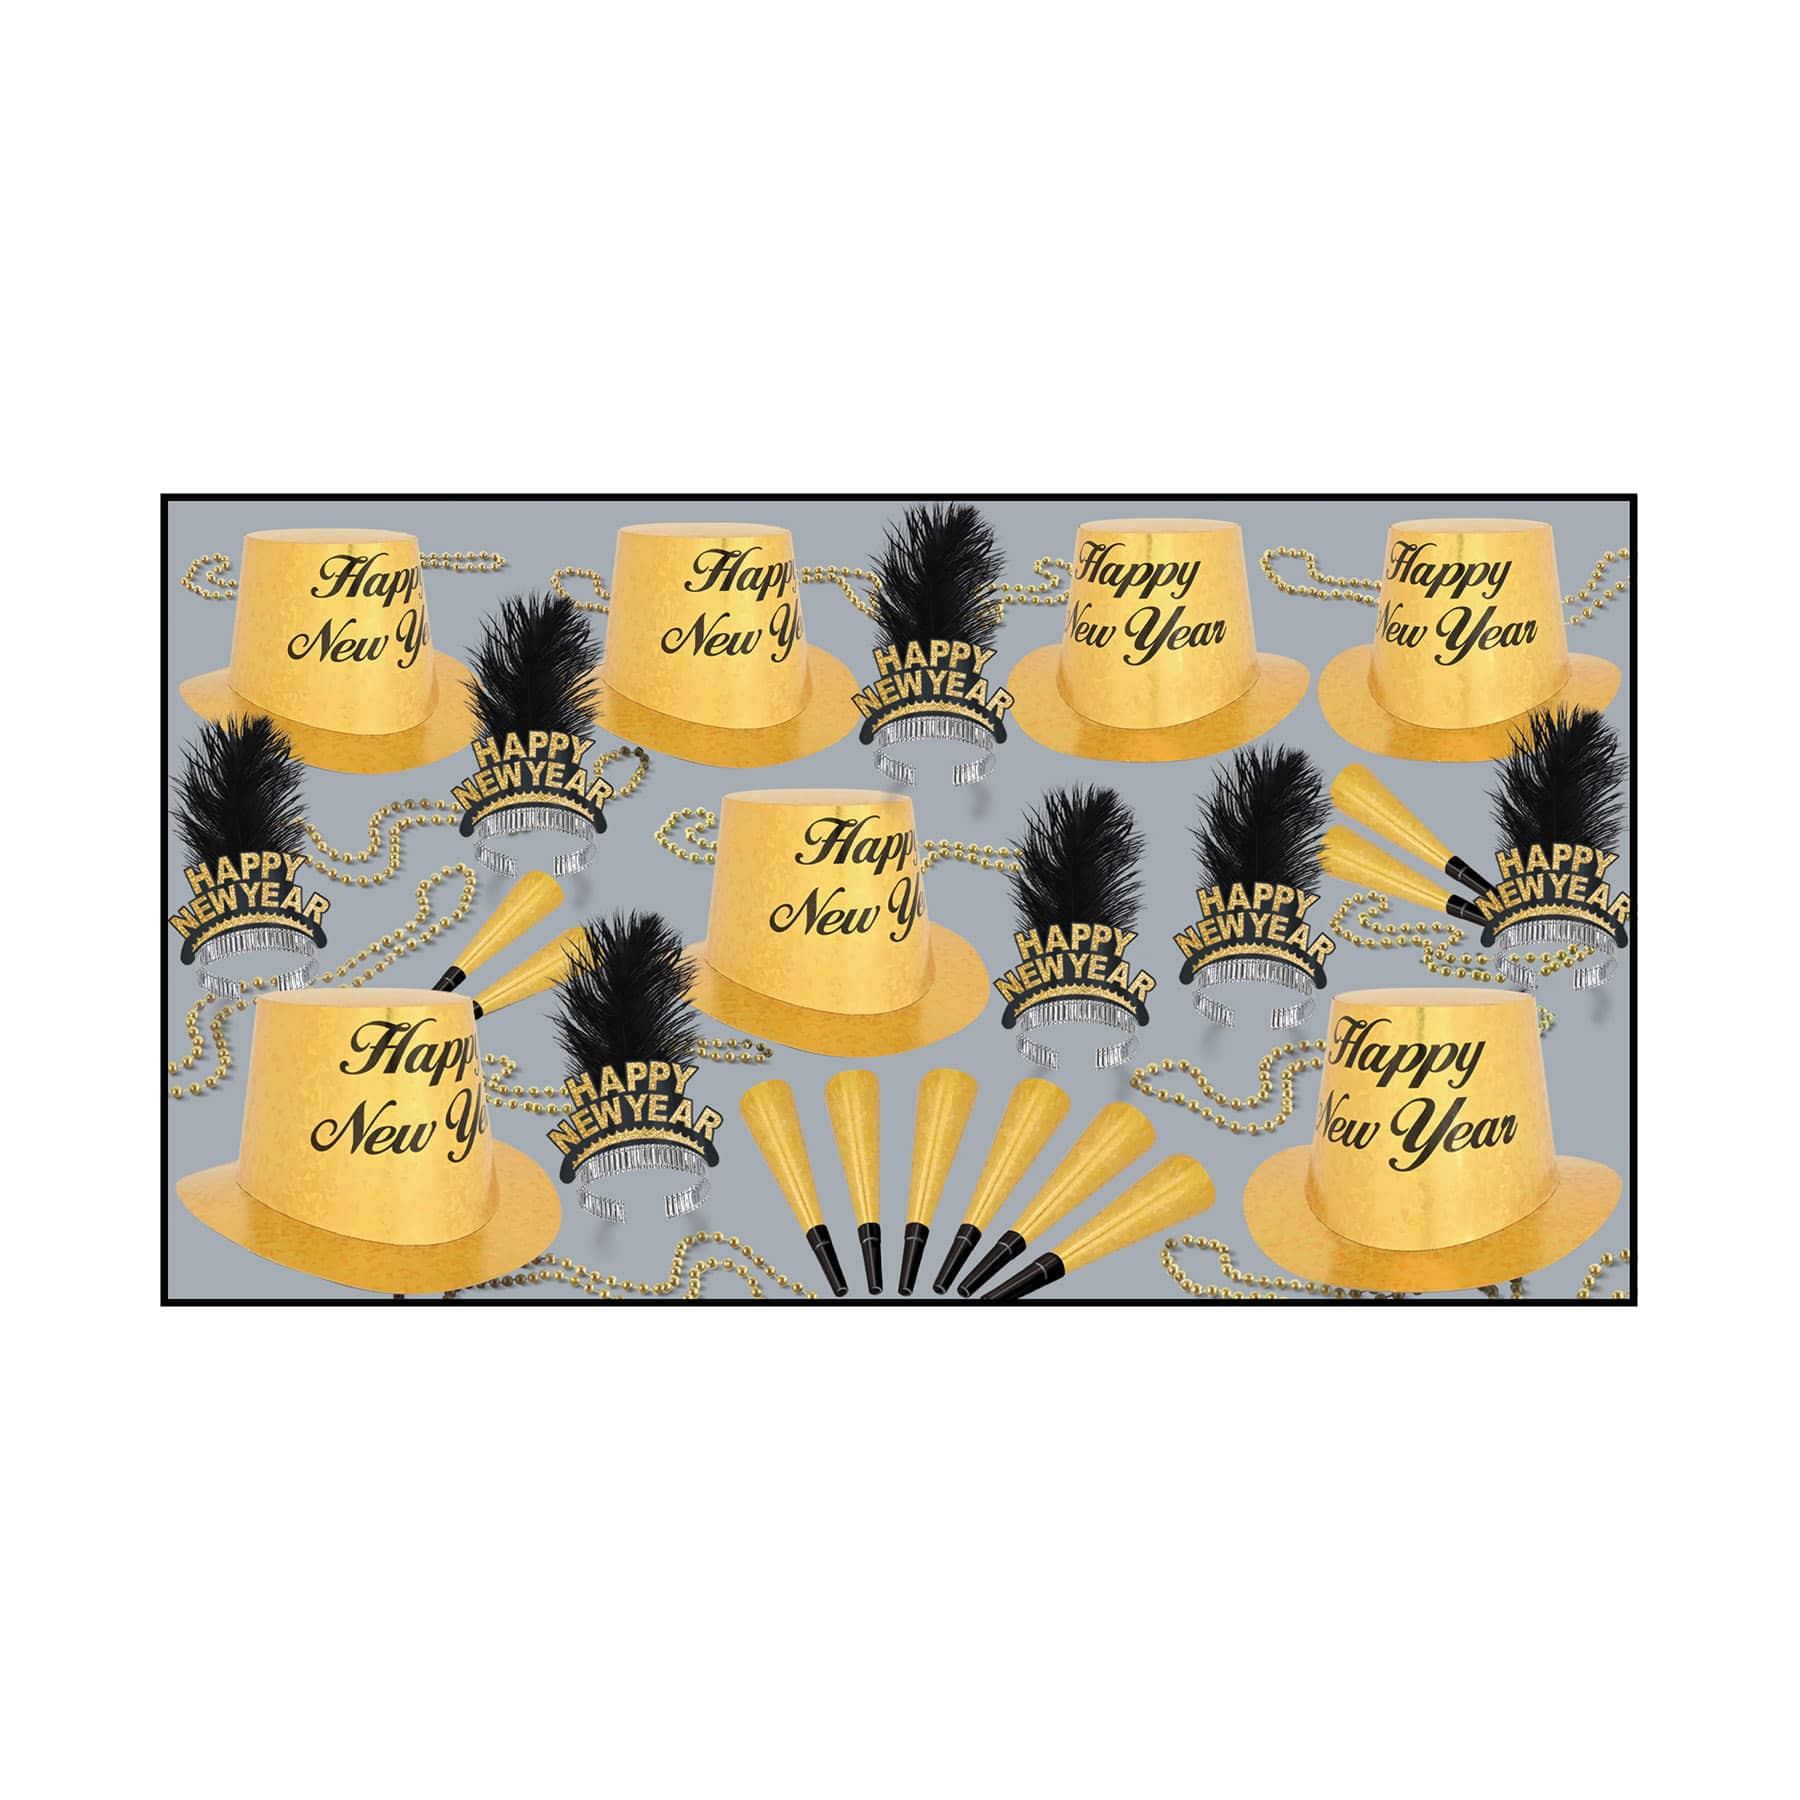 Topaz Happy New Year Assortment for 50 